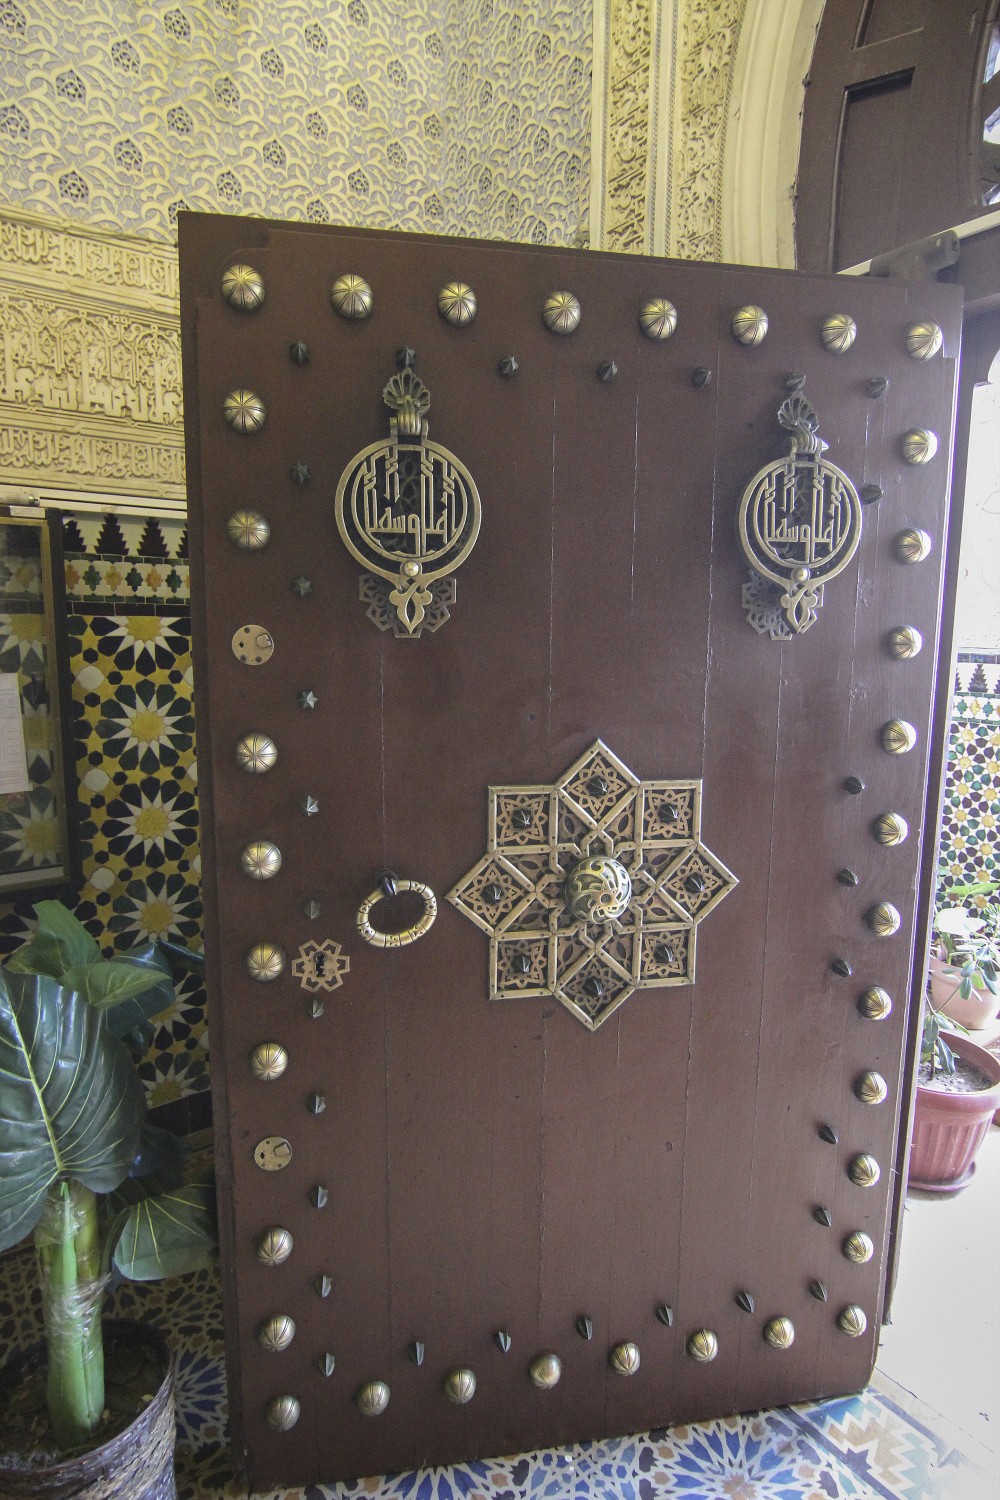 Main entrance portico, detail view of the wooden door showing carved door knocker and decorative iron nails